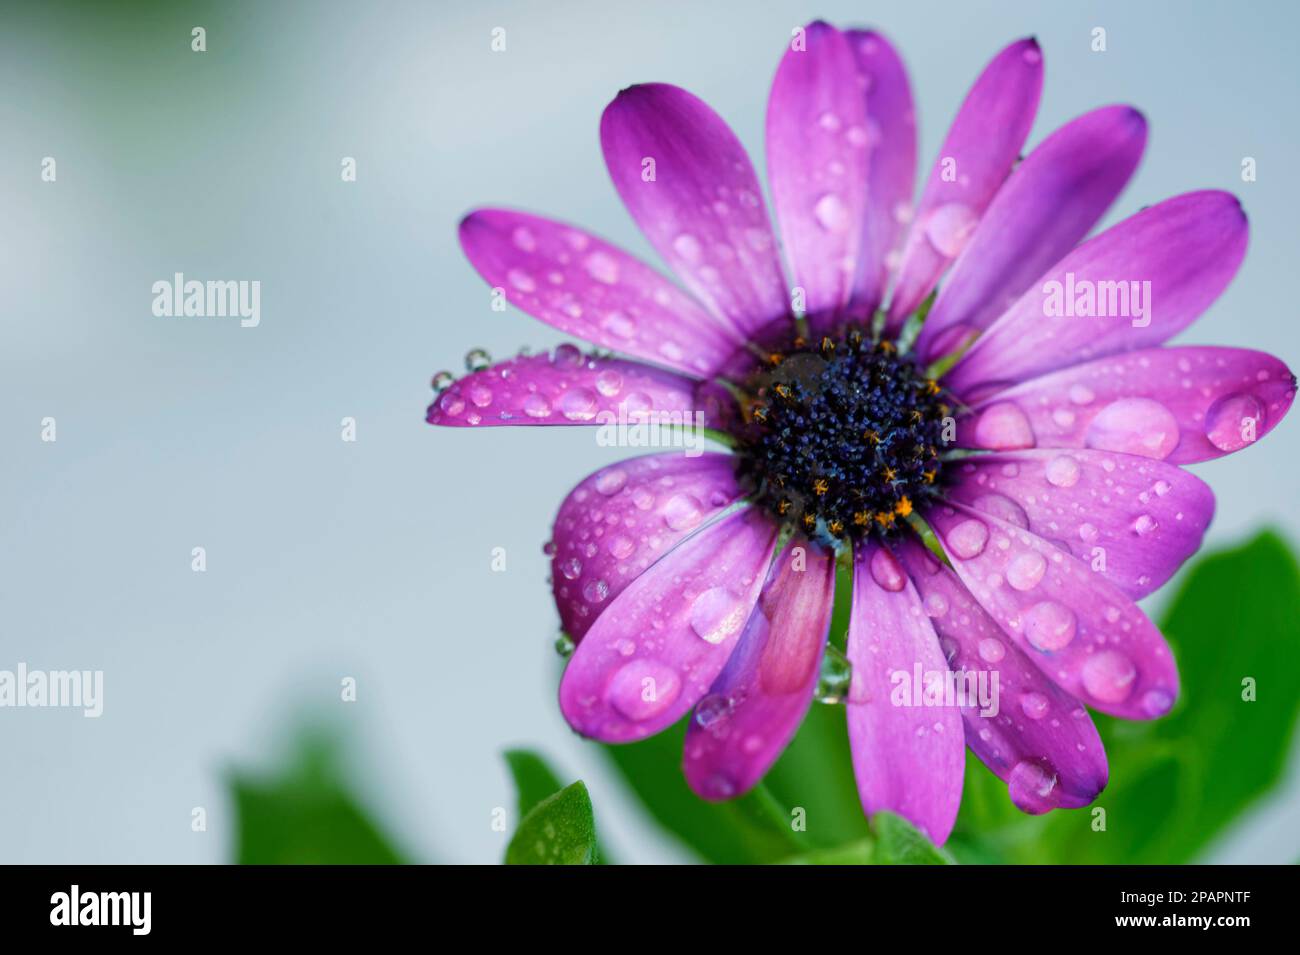 Photo of Purple Cape Marguerite Dimorphotheca ecklonis flower covered in water droplets Stock Photo